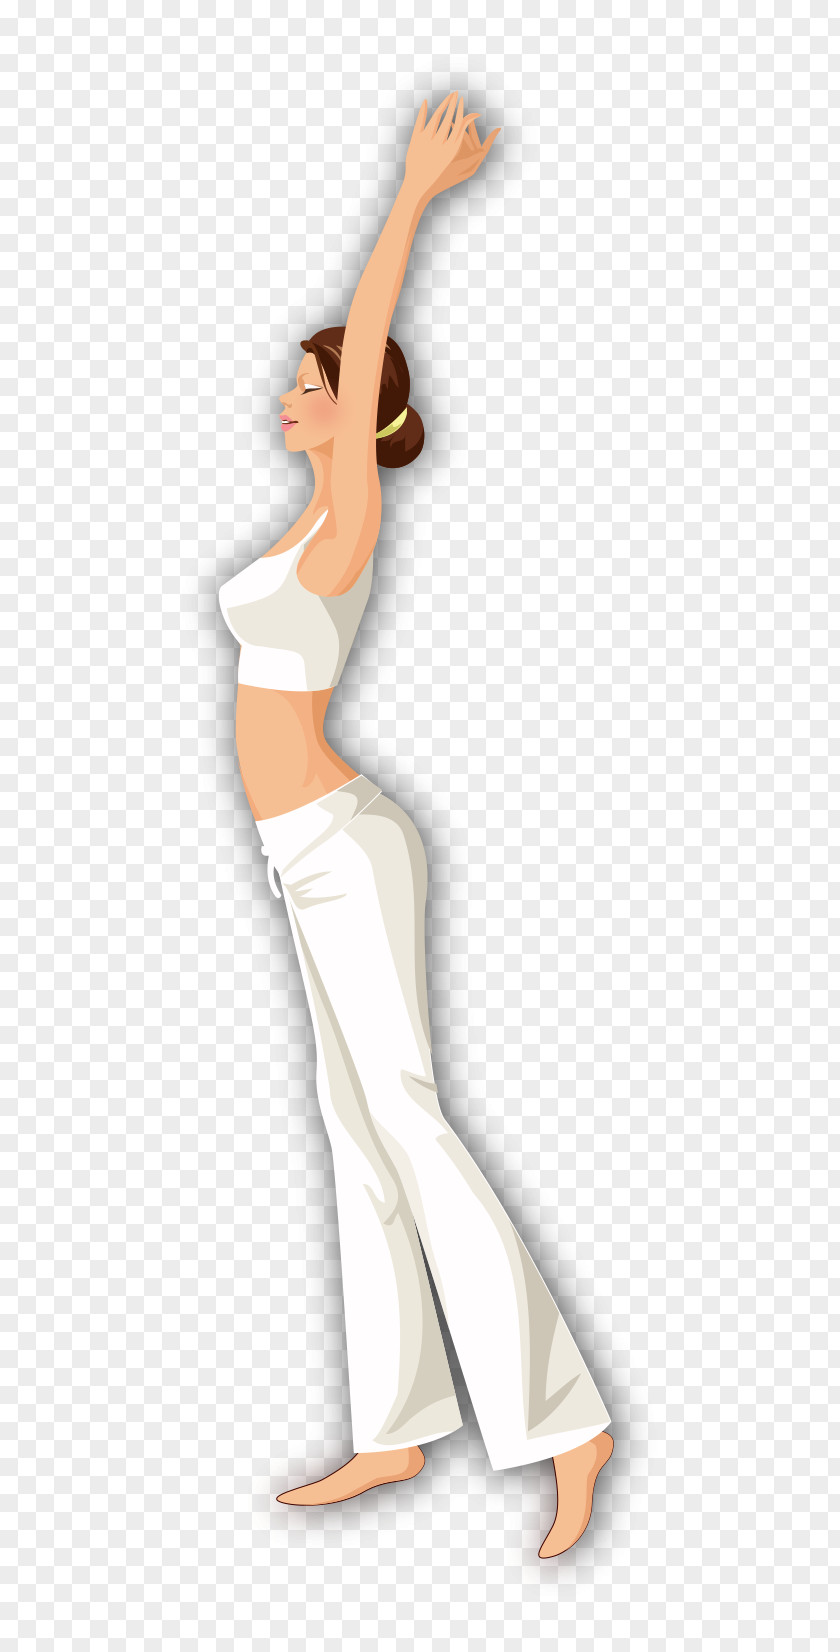 Yoga Beauty Stretching Illustration PNG